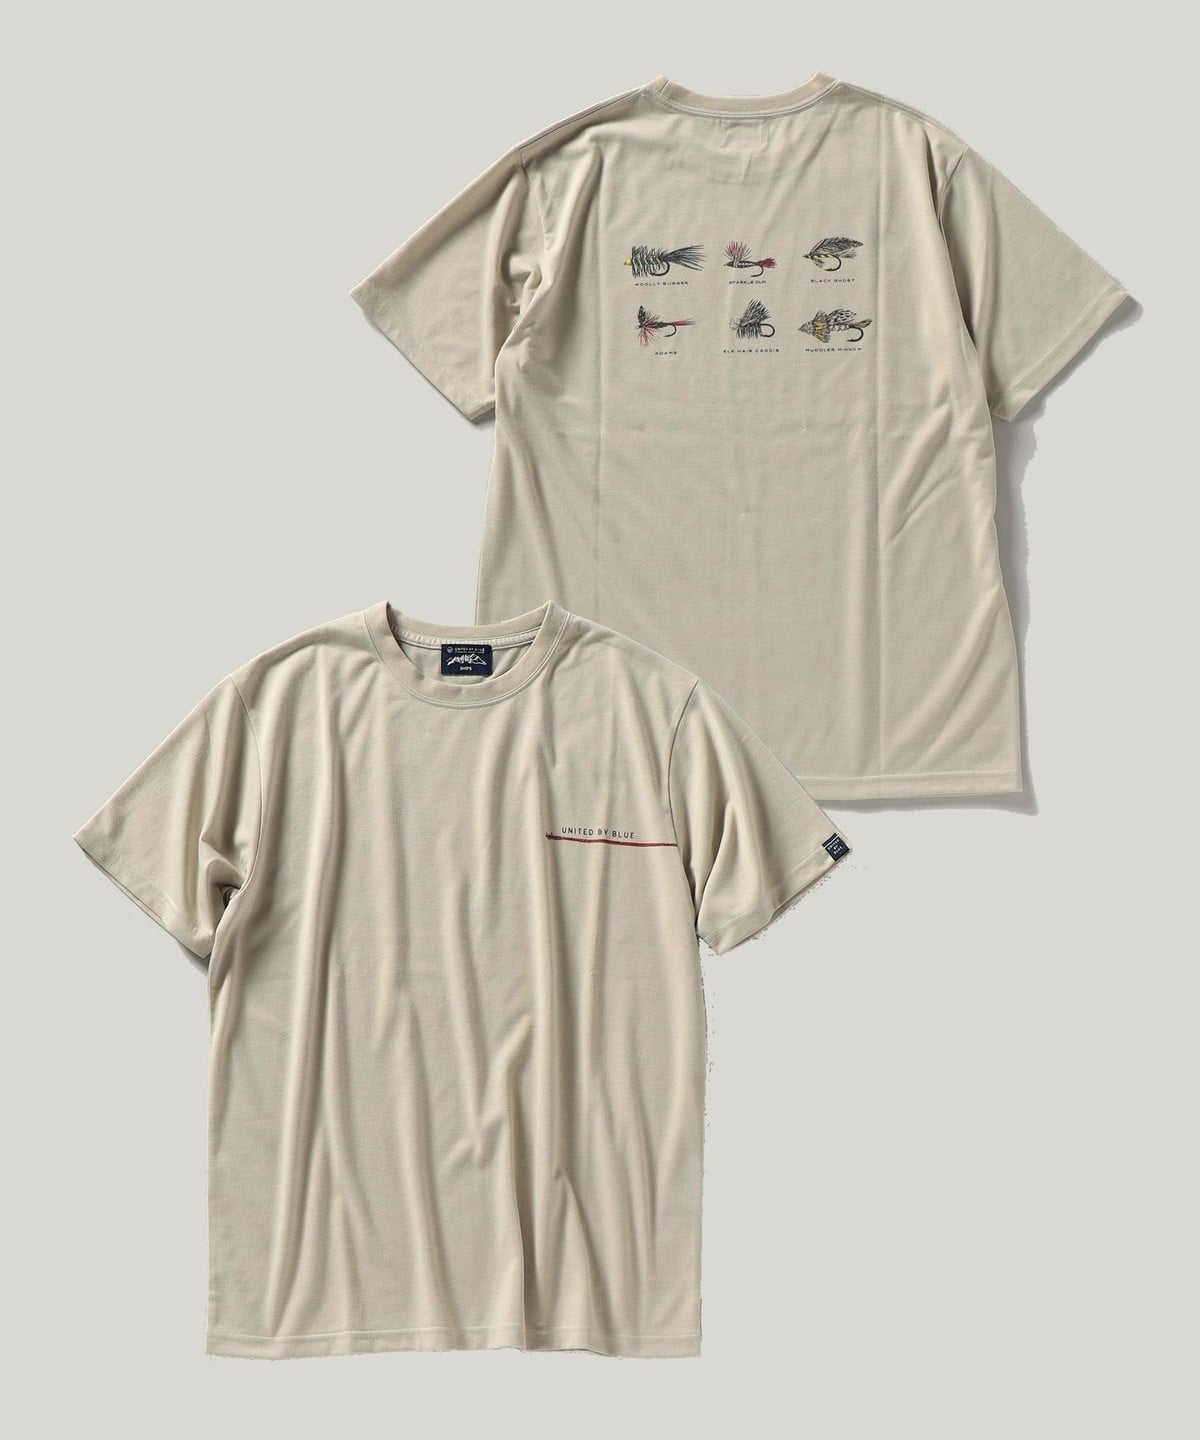 【SHIPS別注】UNITED BY BLUE: FISHING LURE プリント Tシャツ ライトグレー